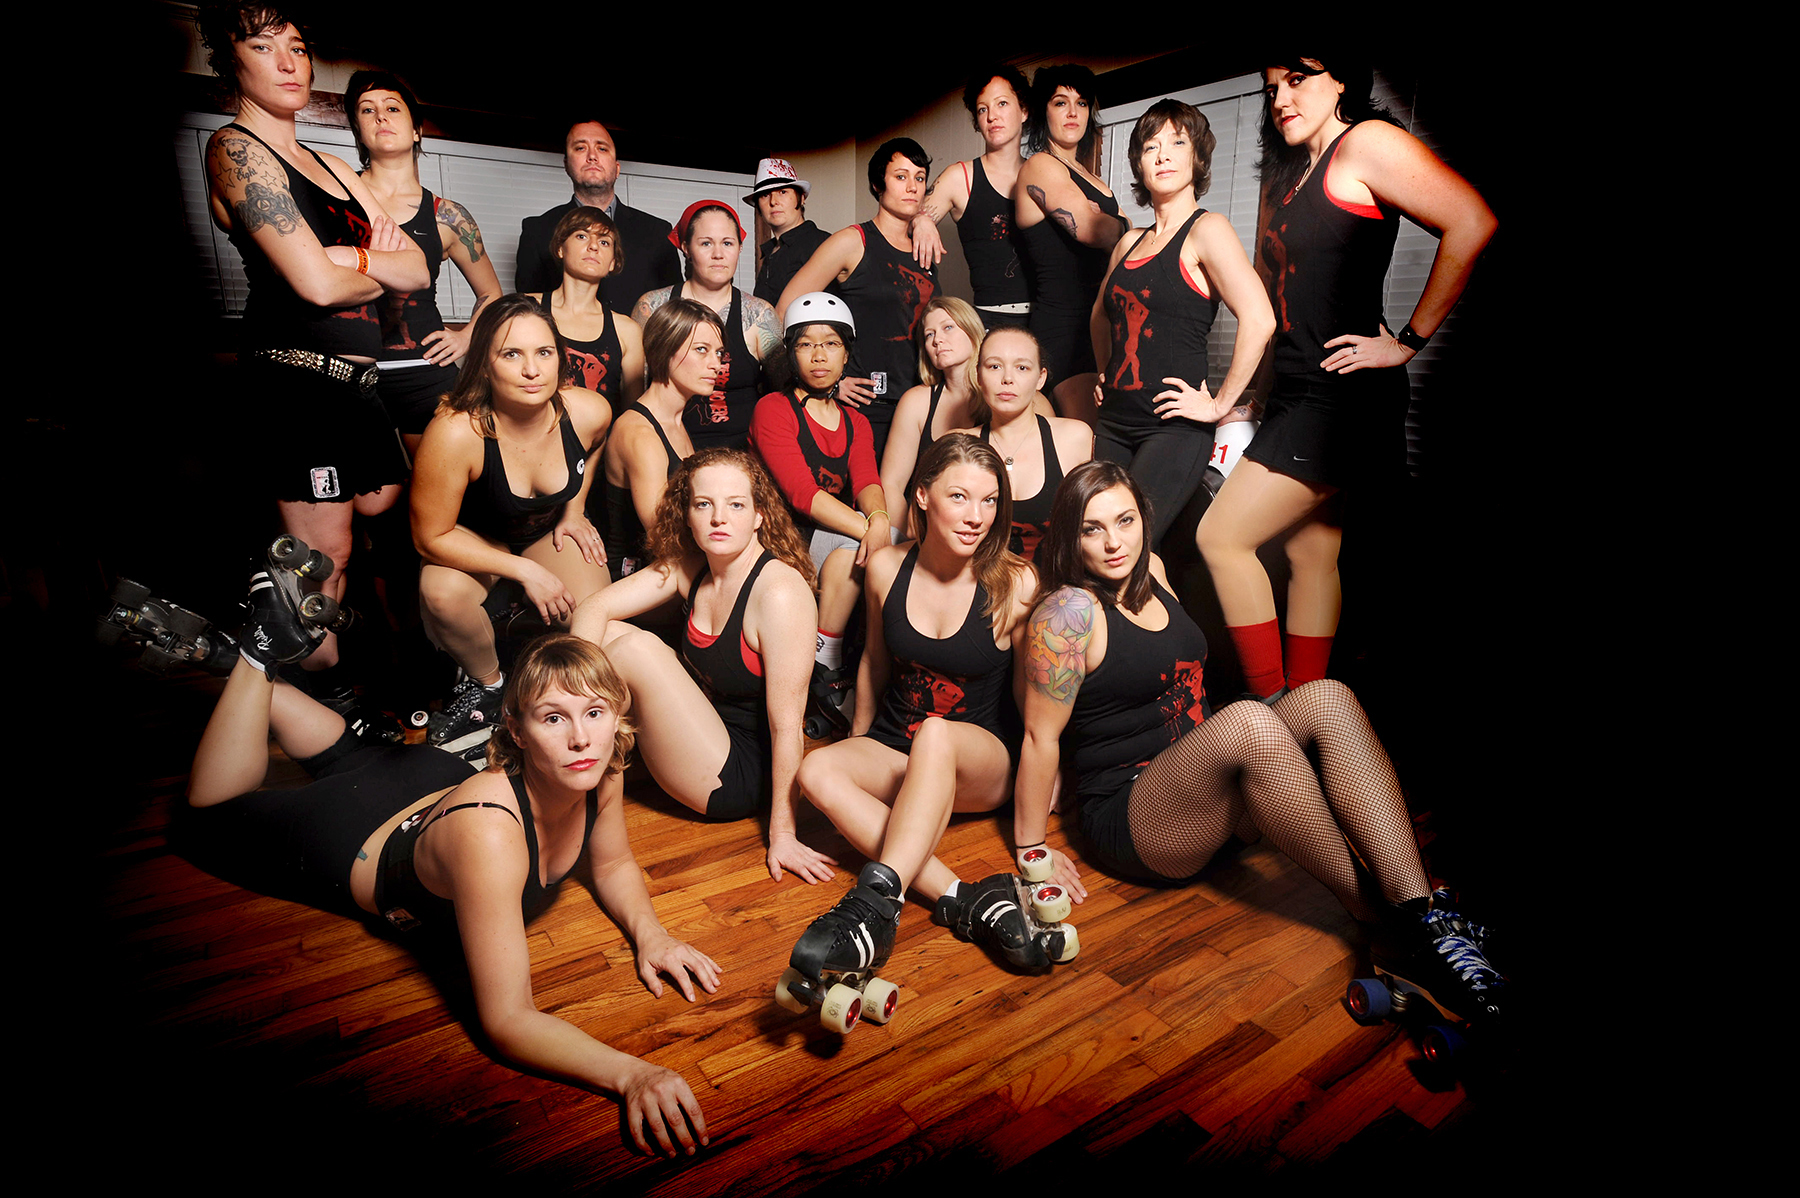 Texecutioners roller derby team